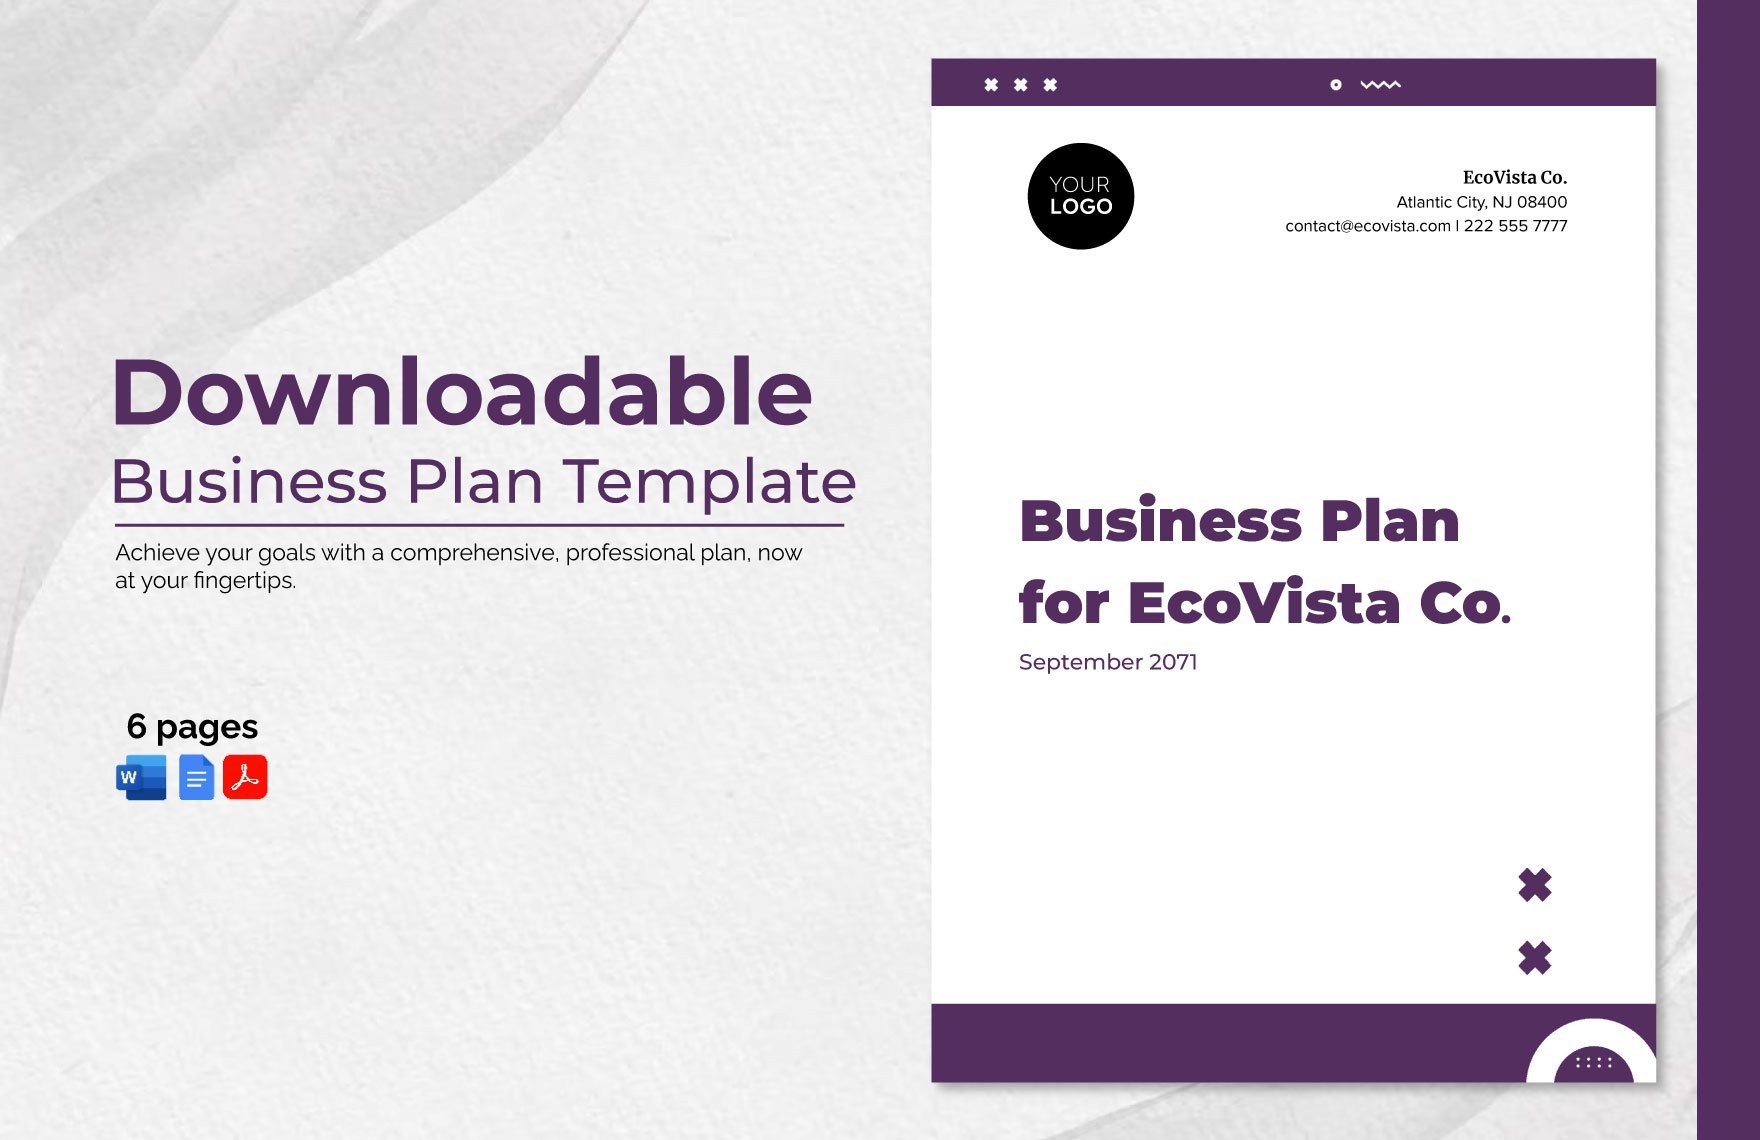 Downloadable Business Plan Template